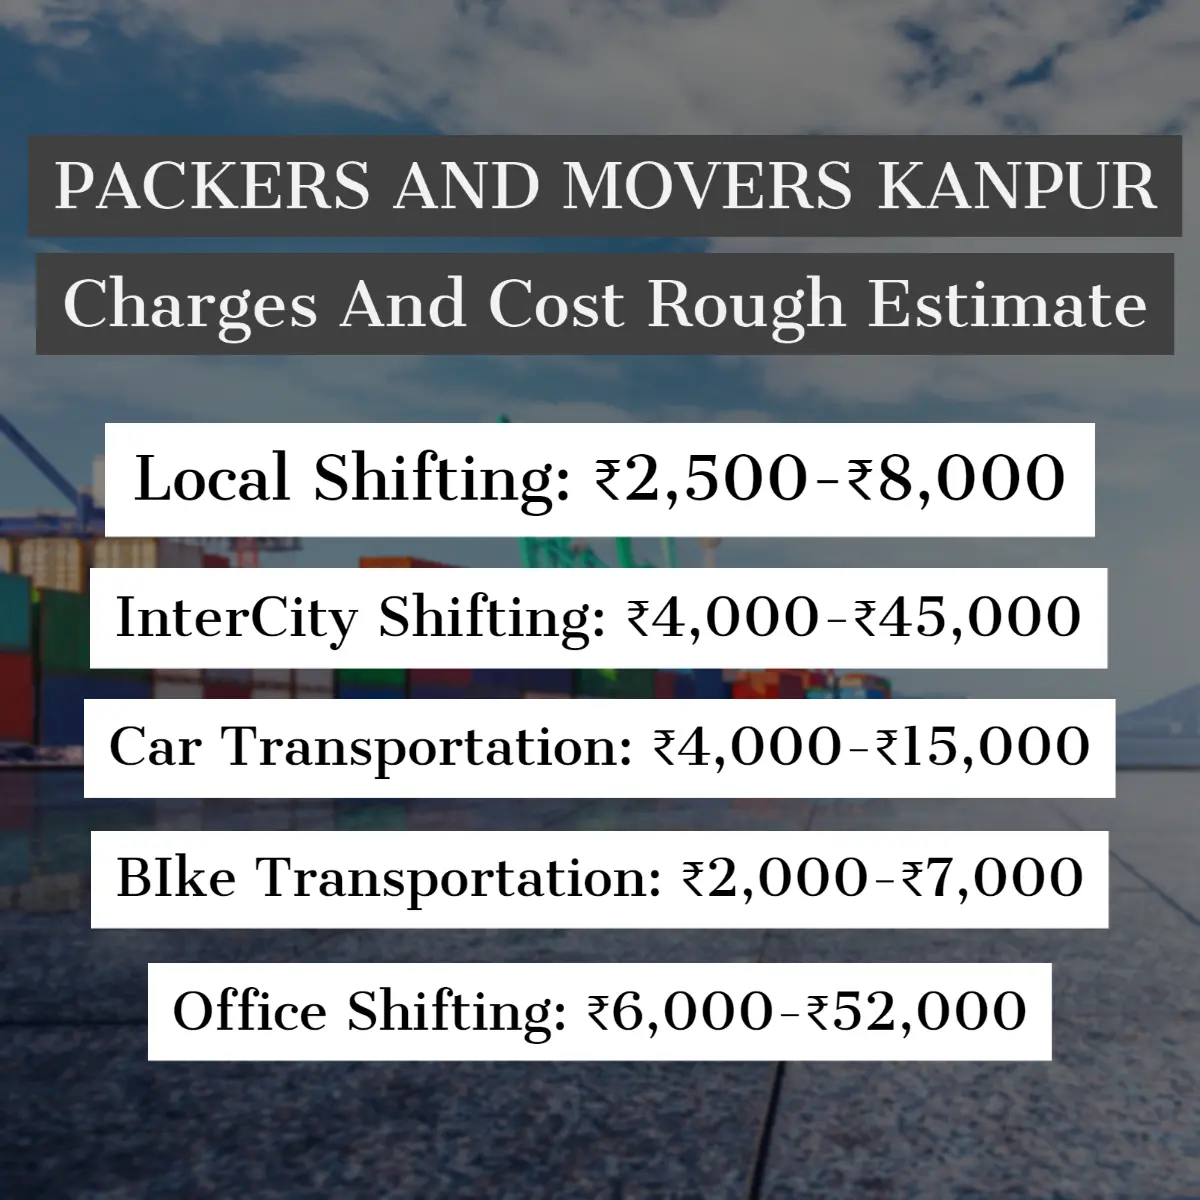 Packers and Movers Kanpur Charges